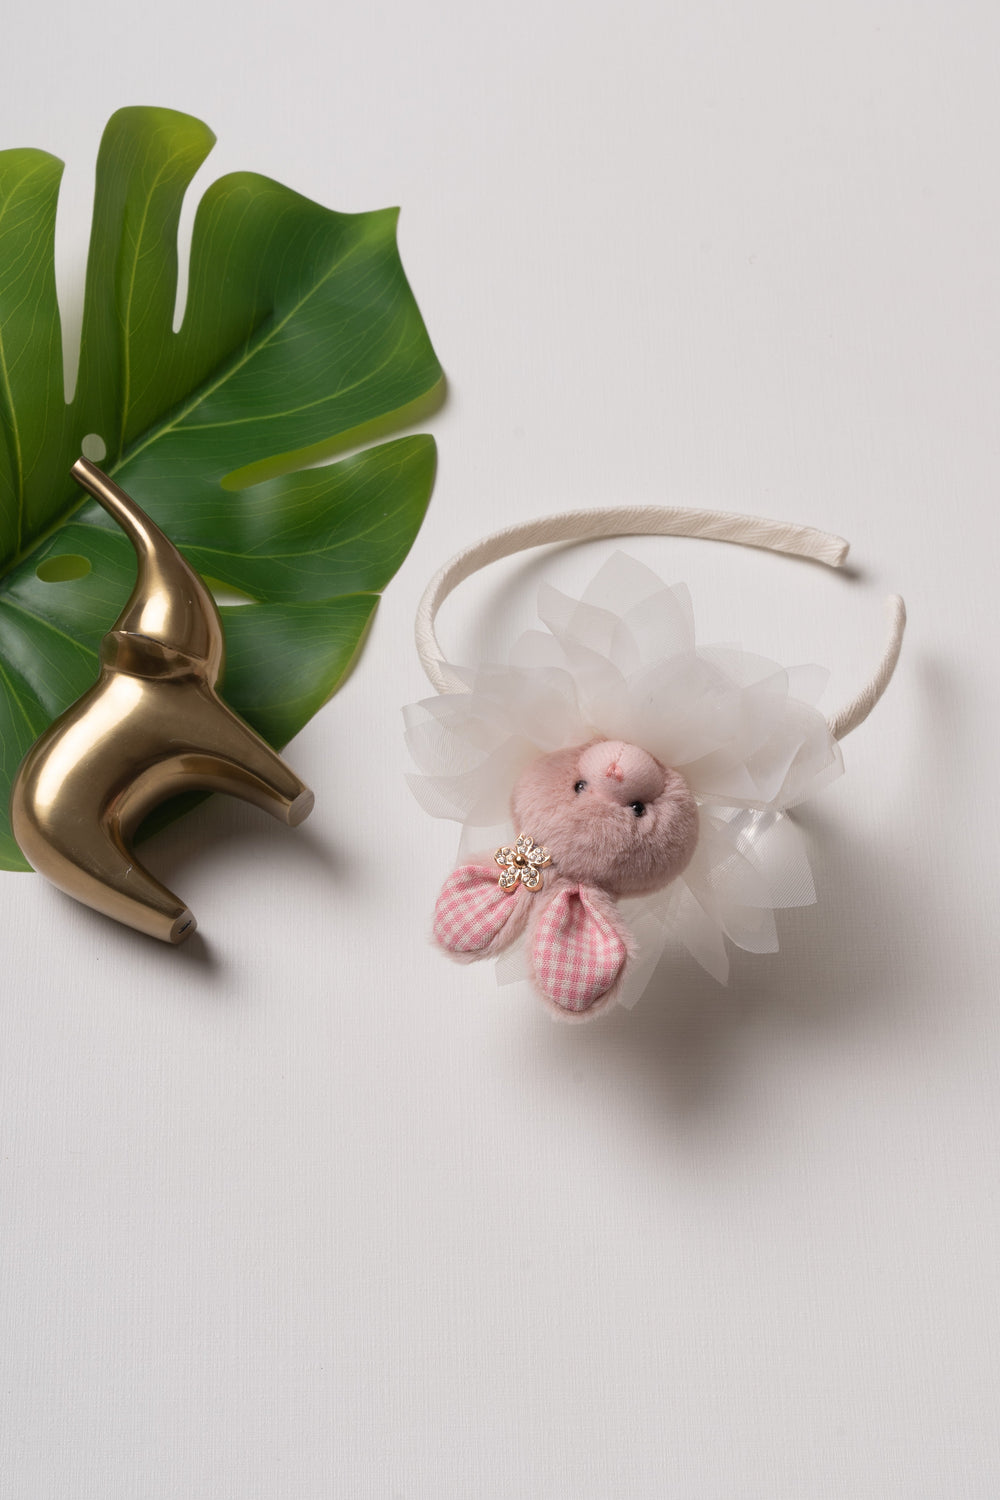 The Nesavu Hair Band Enchanted Plush Bunny Hairbow with White Tulle and Sparkling Accents Nesavu White JHB80C Plush Bunny Hair Accessory with Tulle | Magical Hairbow for Children | The Nesavu